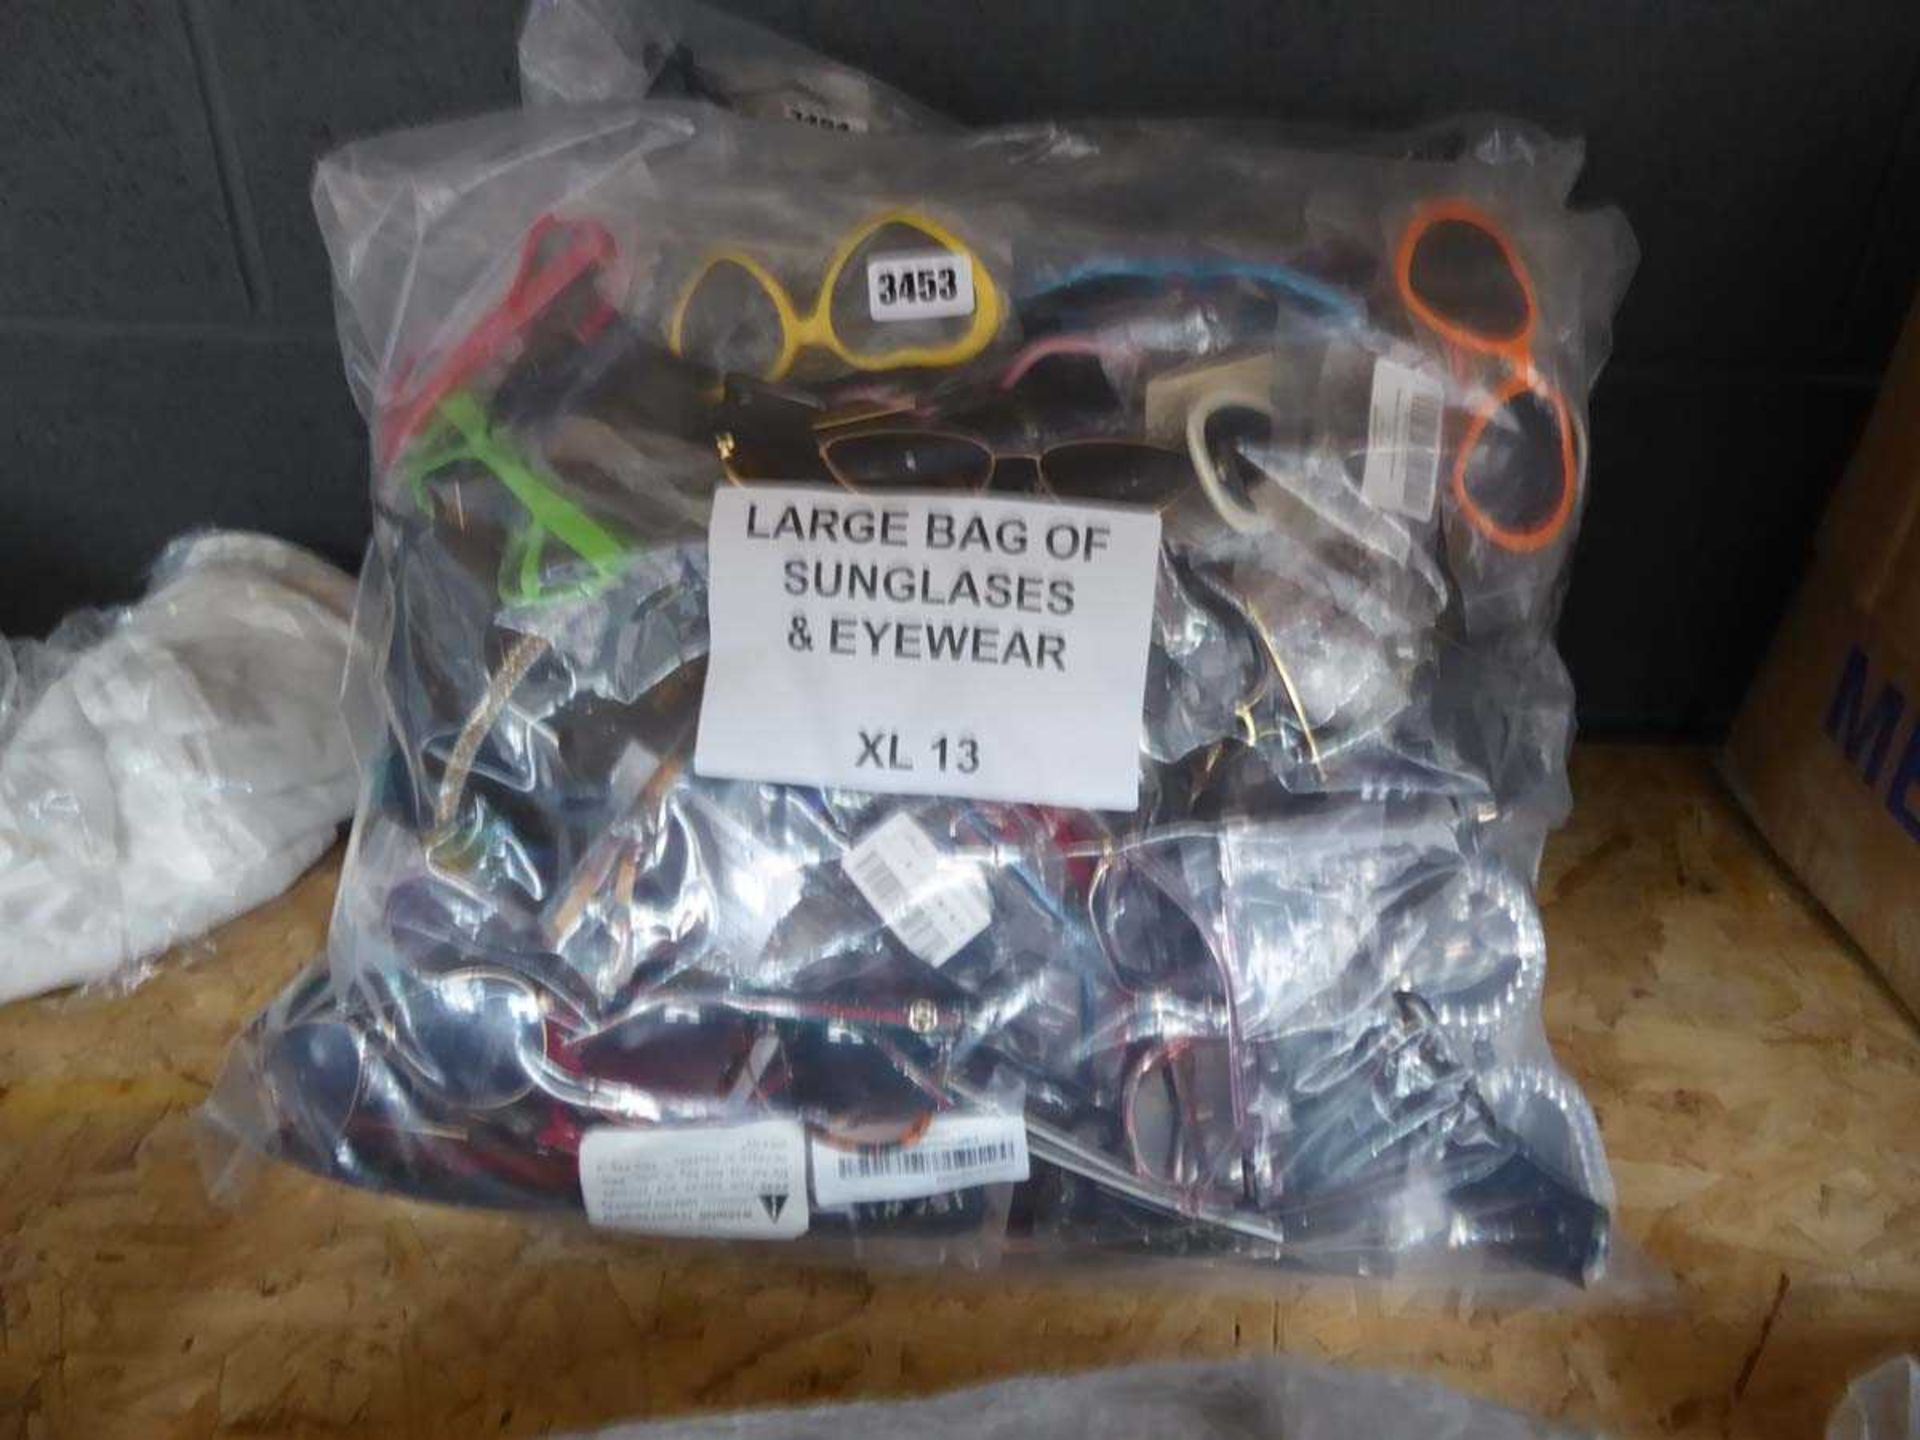 Large bag of sunglasses and eye ware